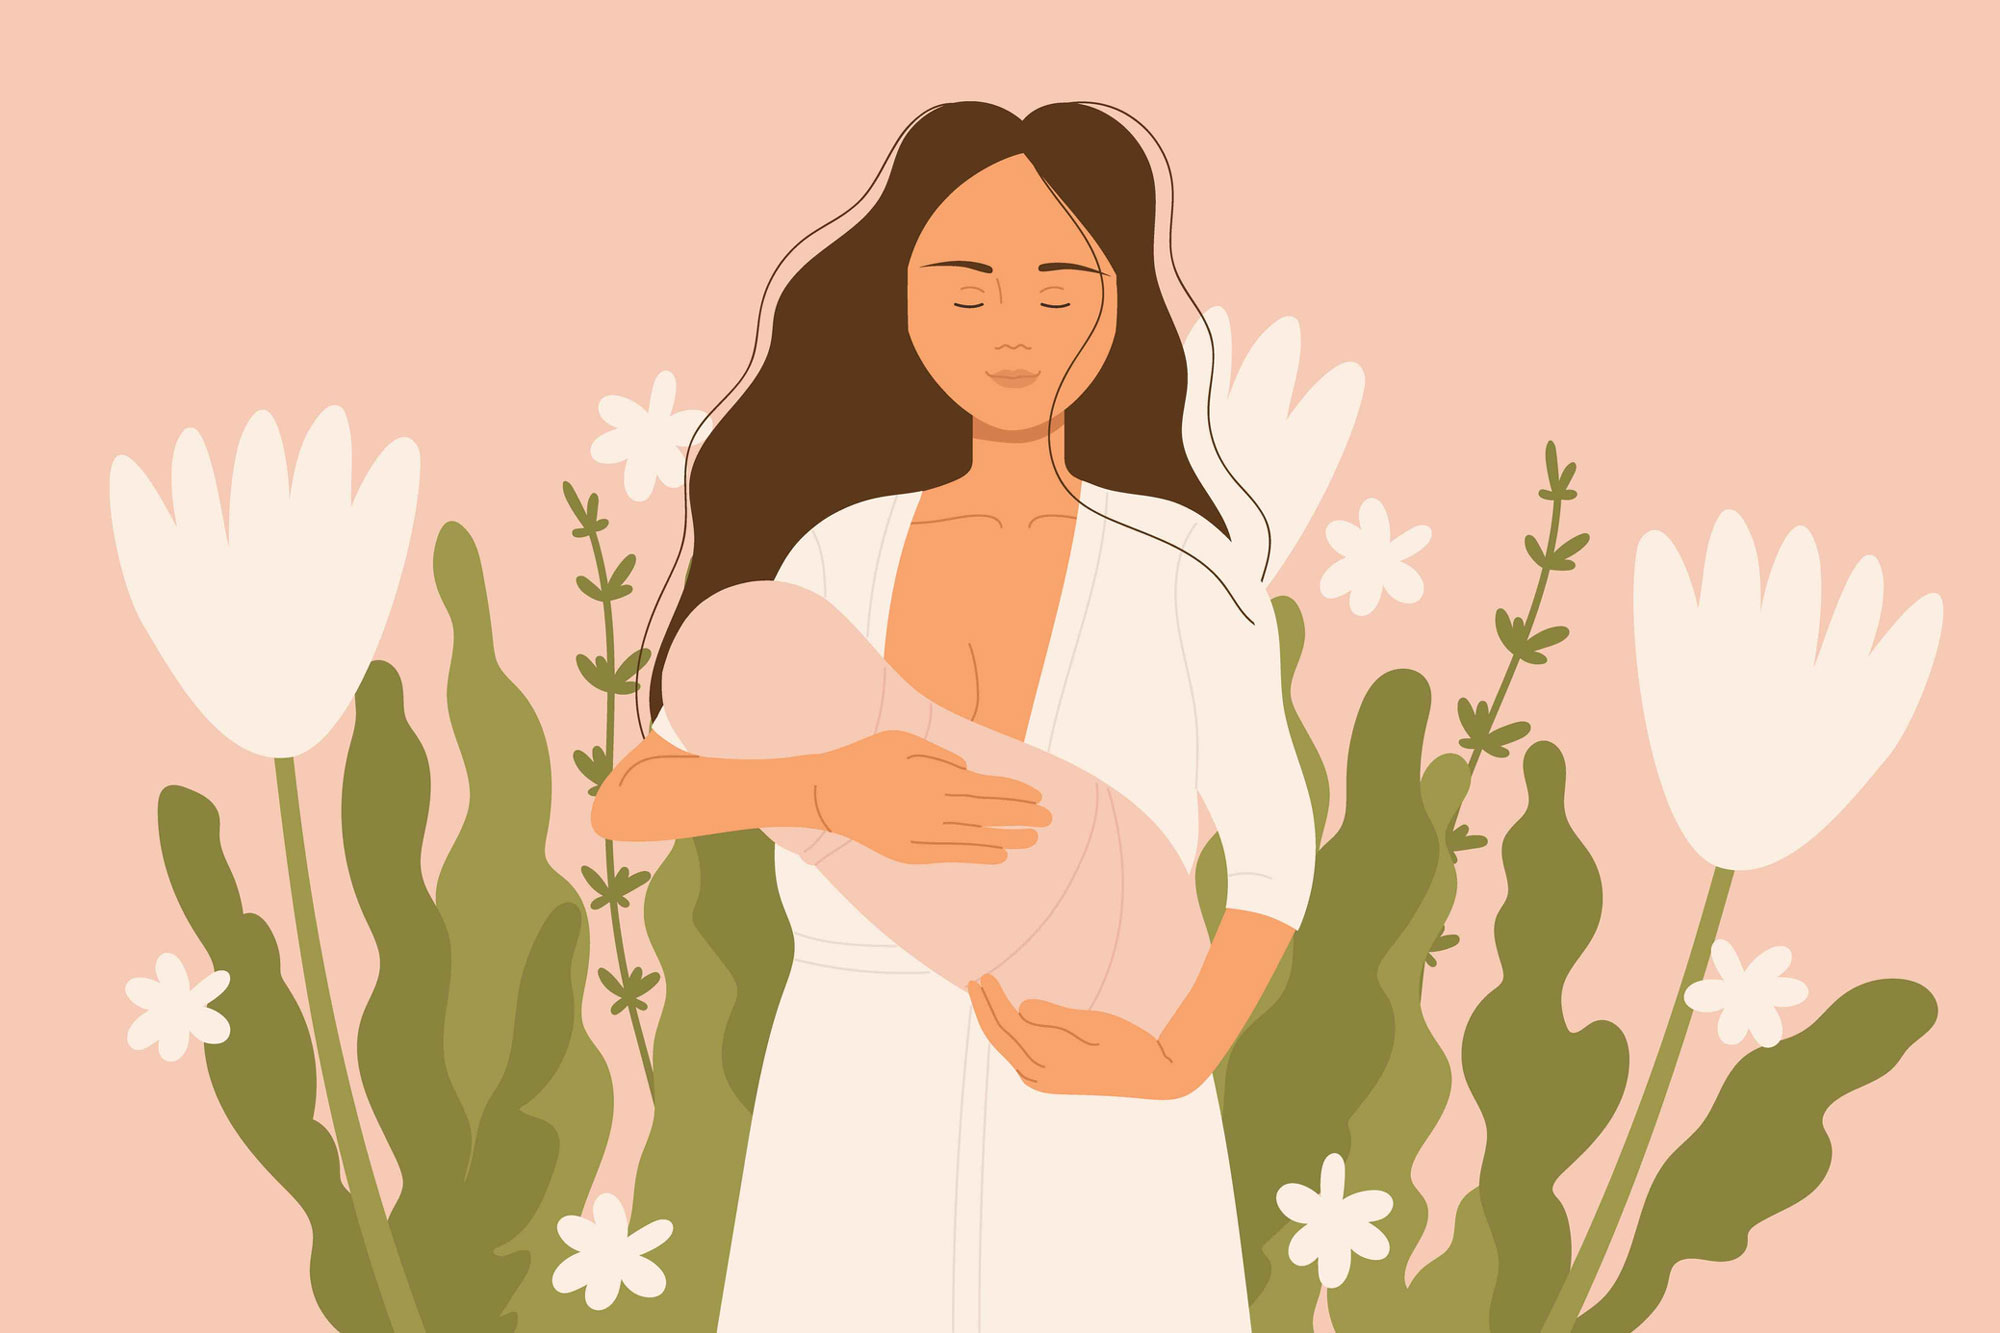 illustration of caring woman breastfeeding her baby